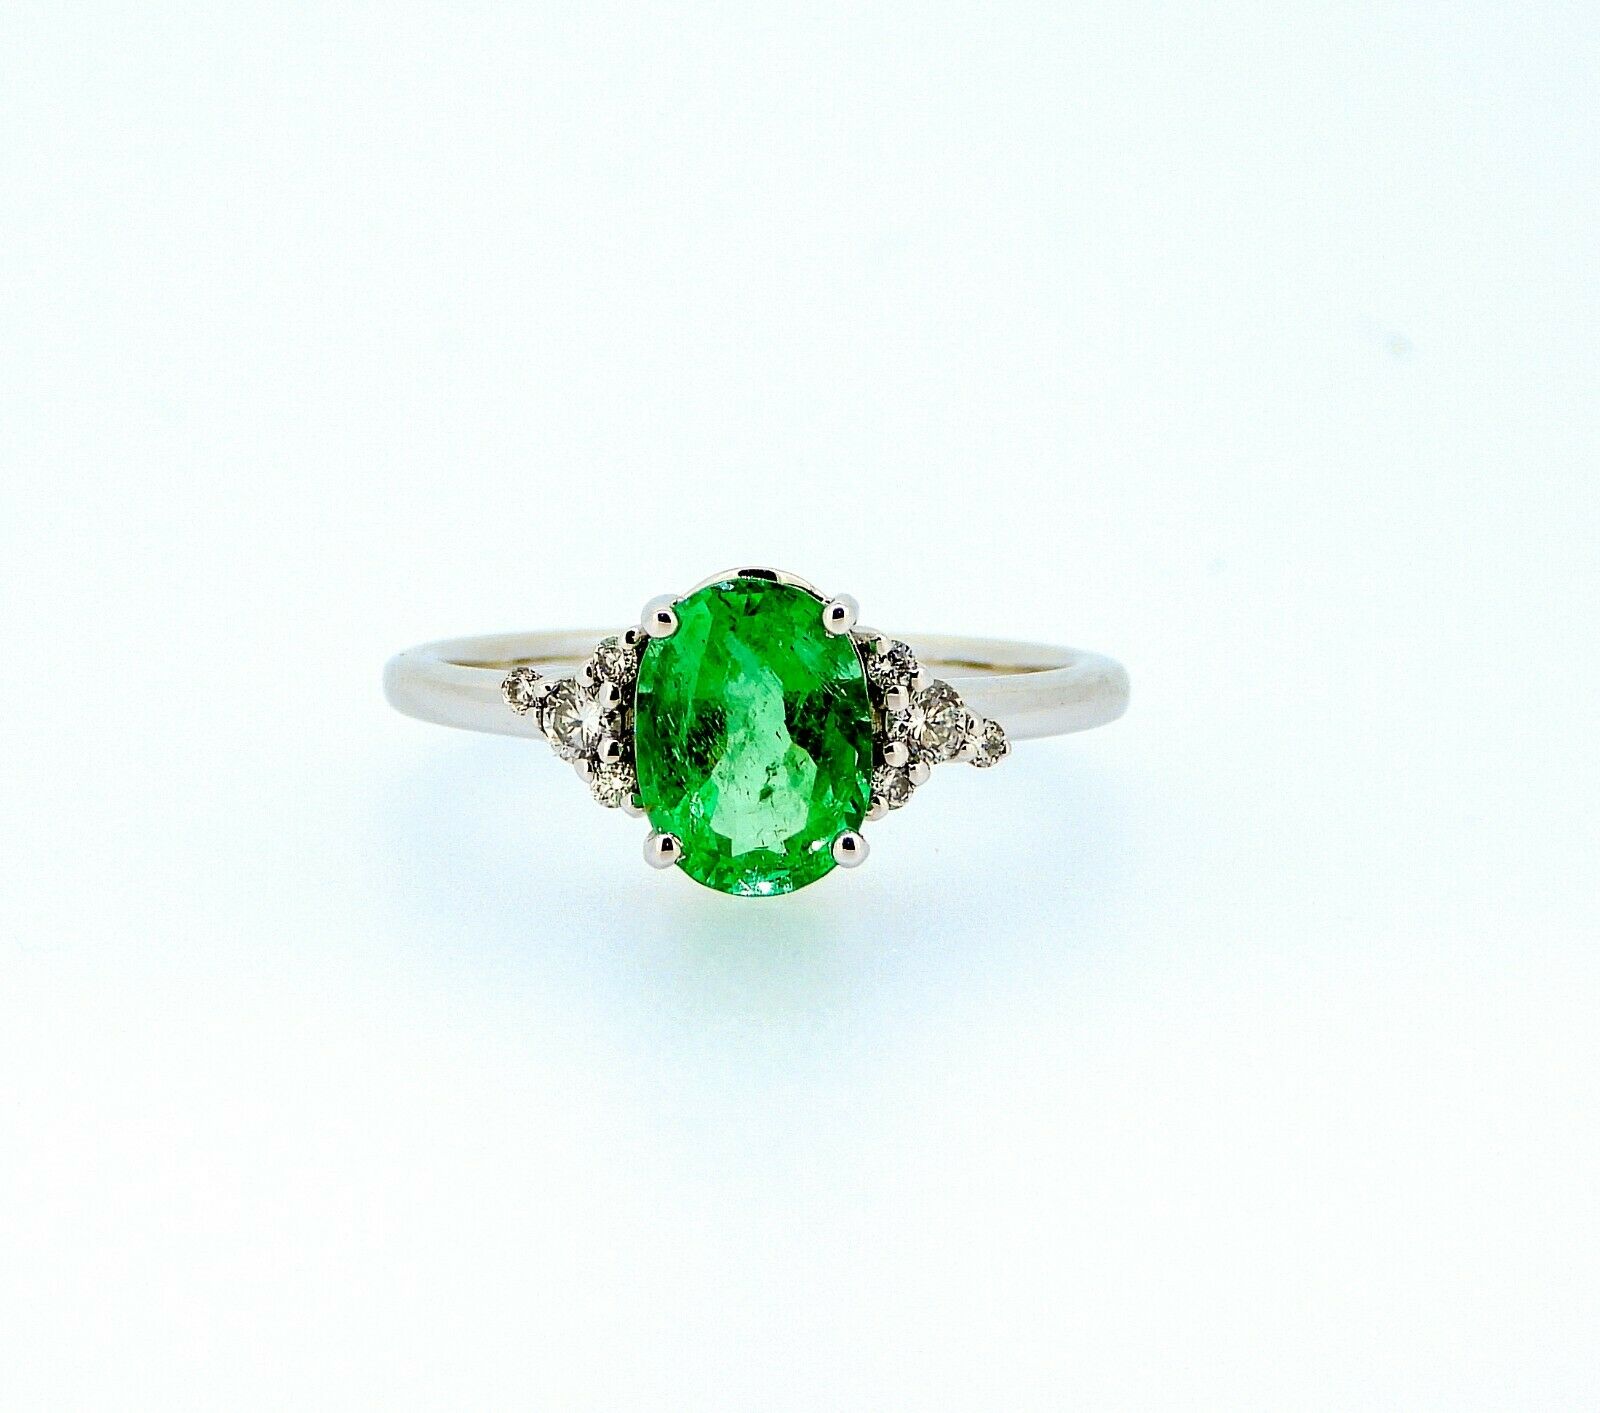 Certified 1.58 ct Natural High Quality Emerald and Diamonds 18K White Gold Ring - Image 4 of 6